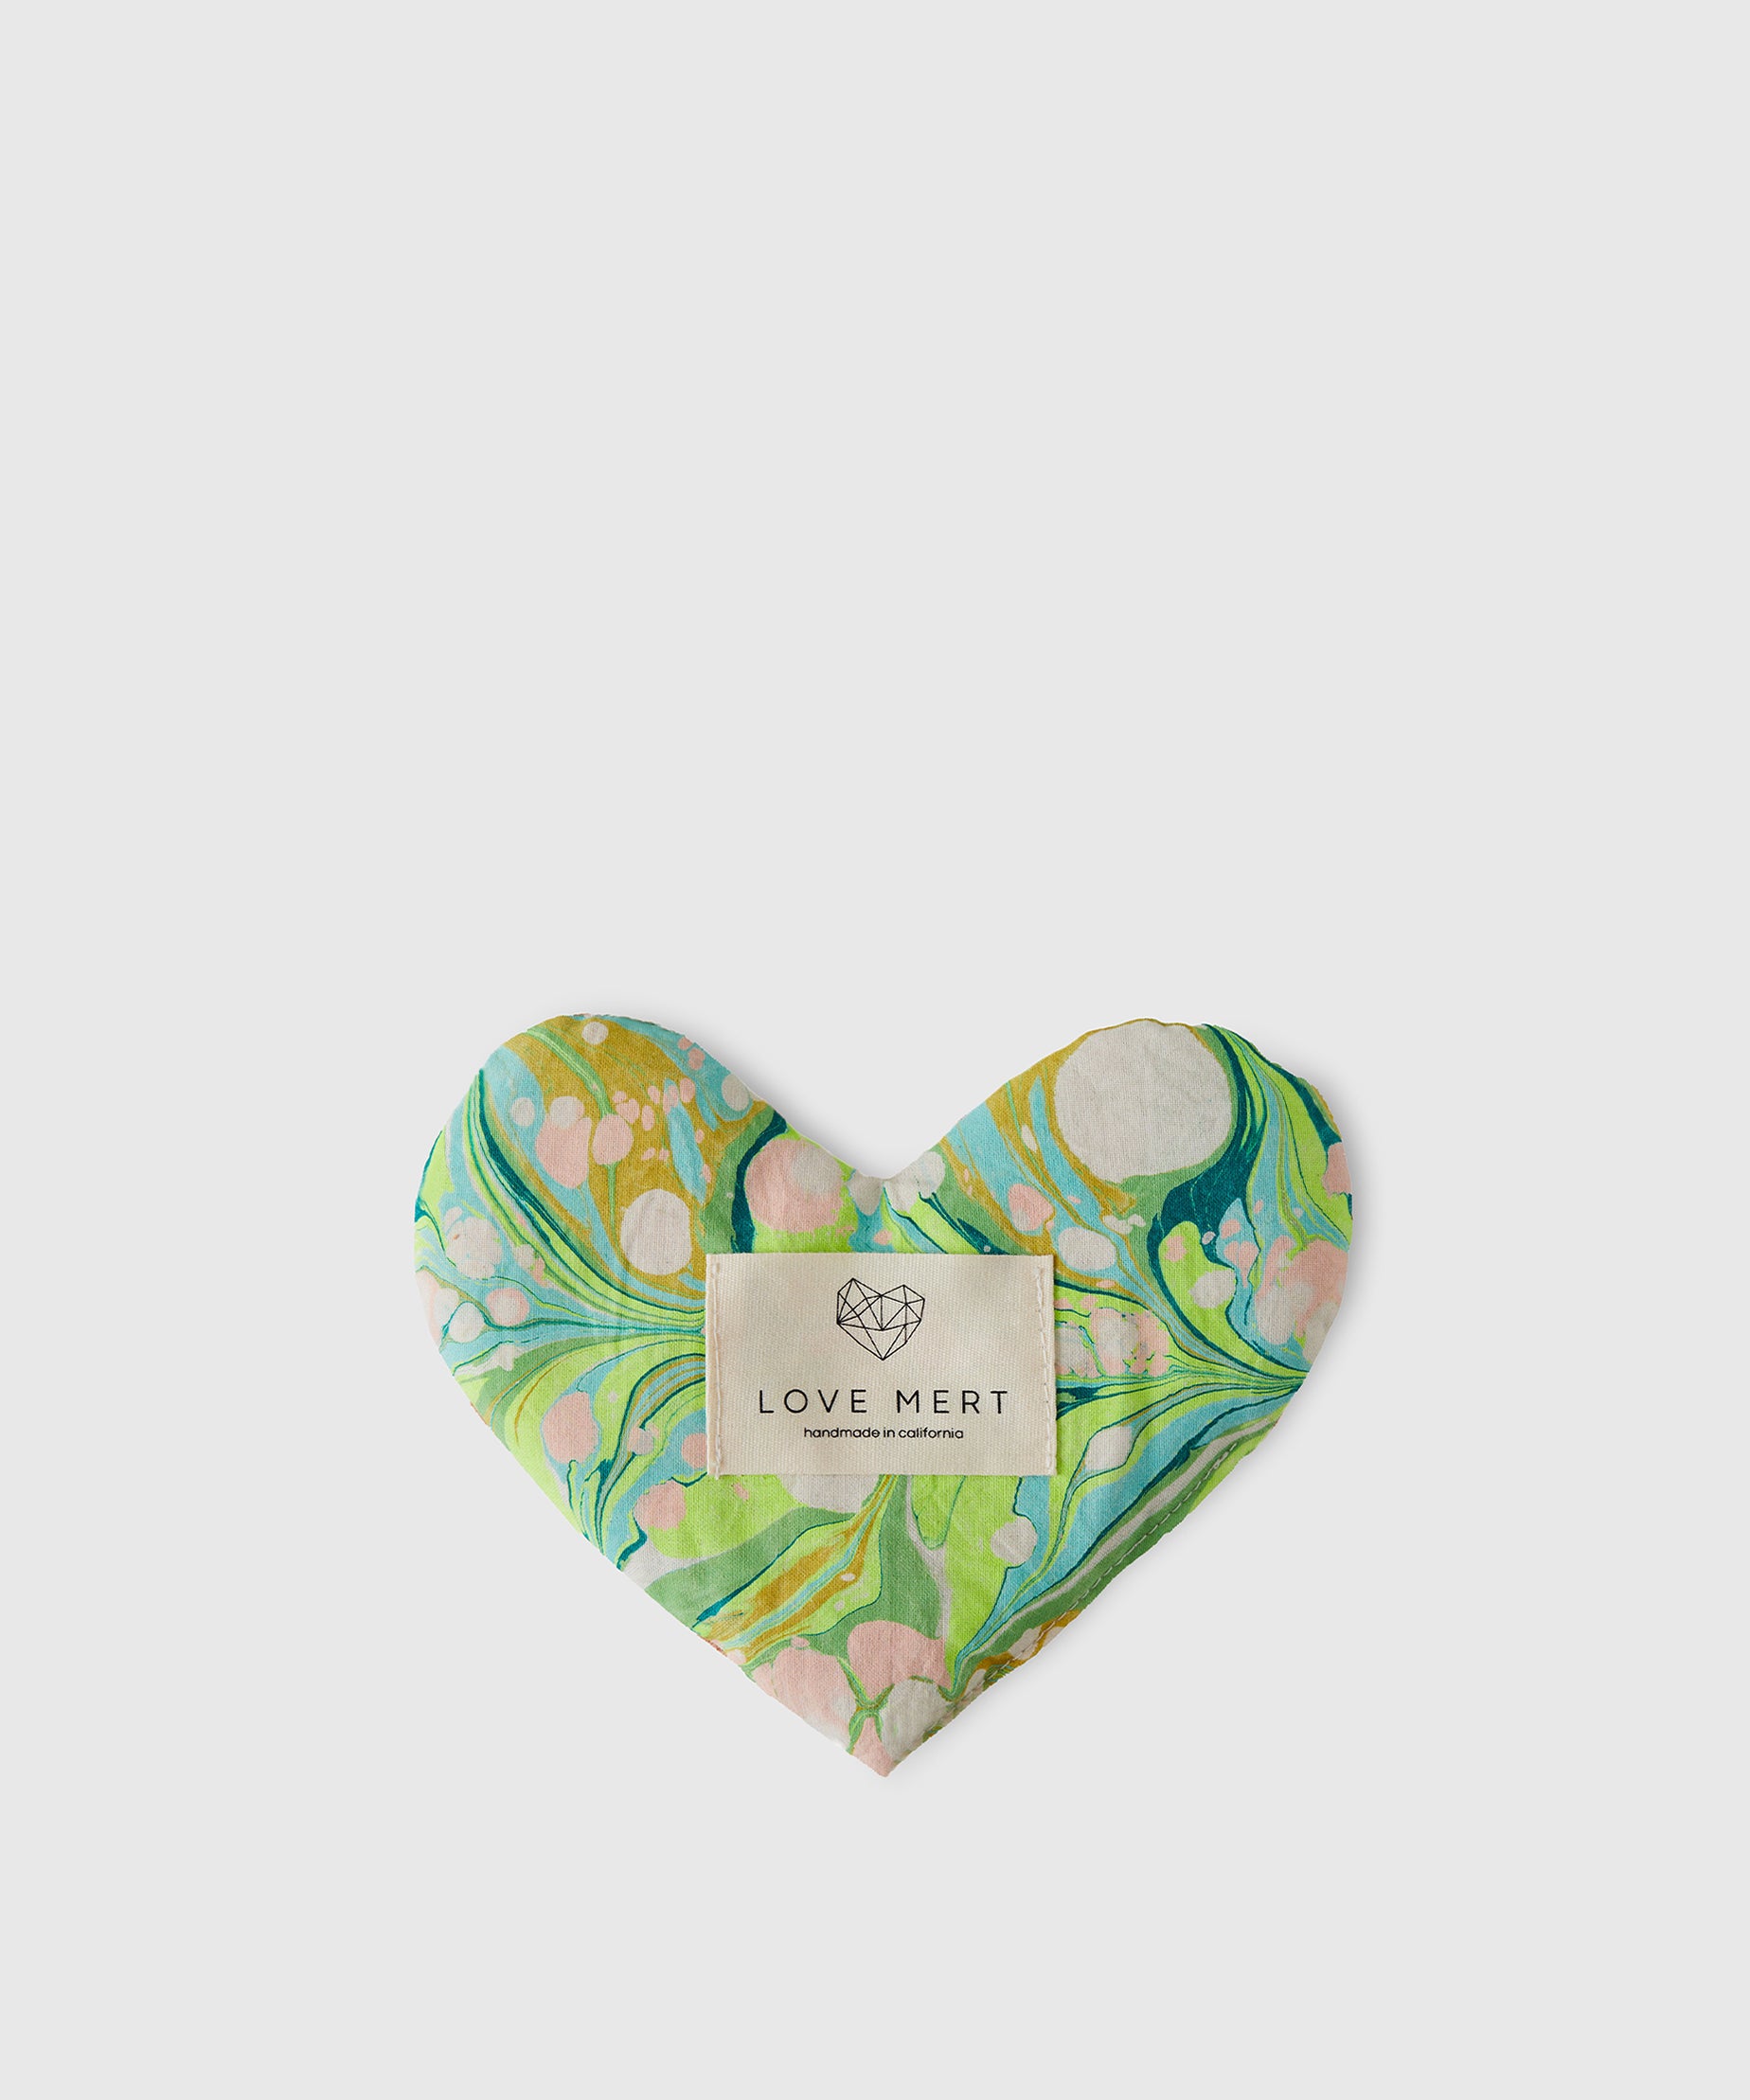 Lavender Heart Eye Pillow | Organic and Sustainable